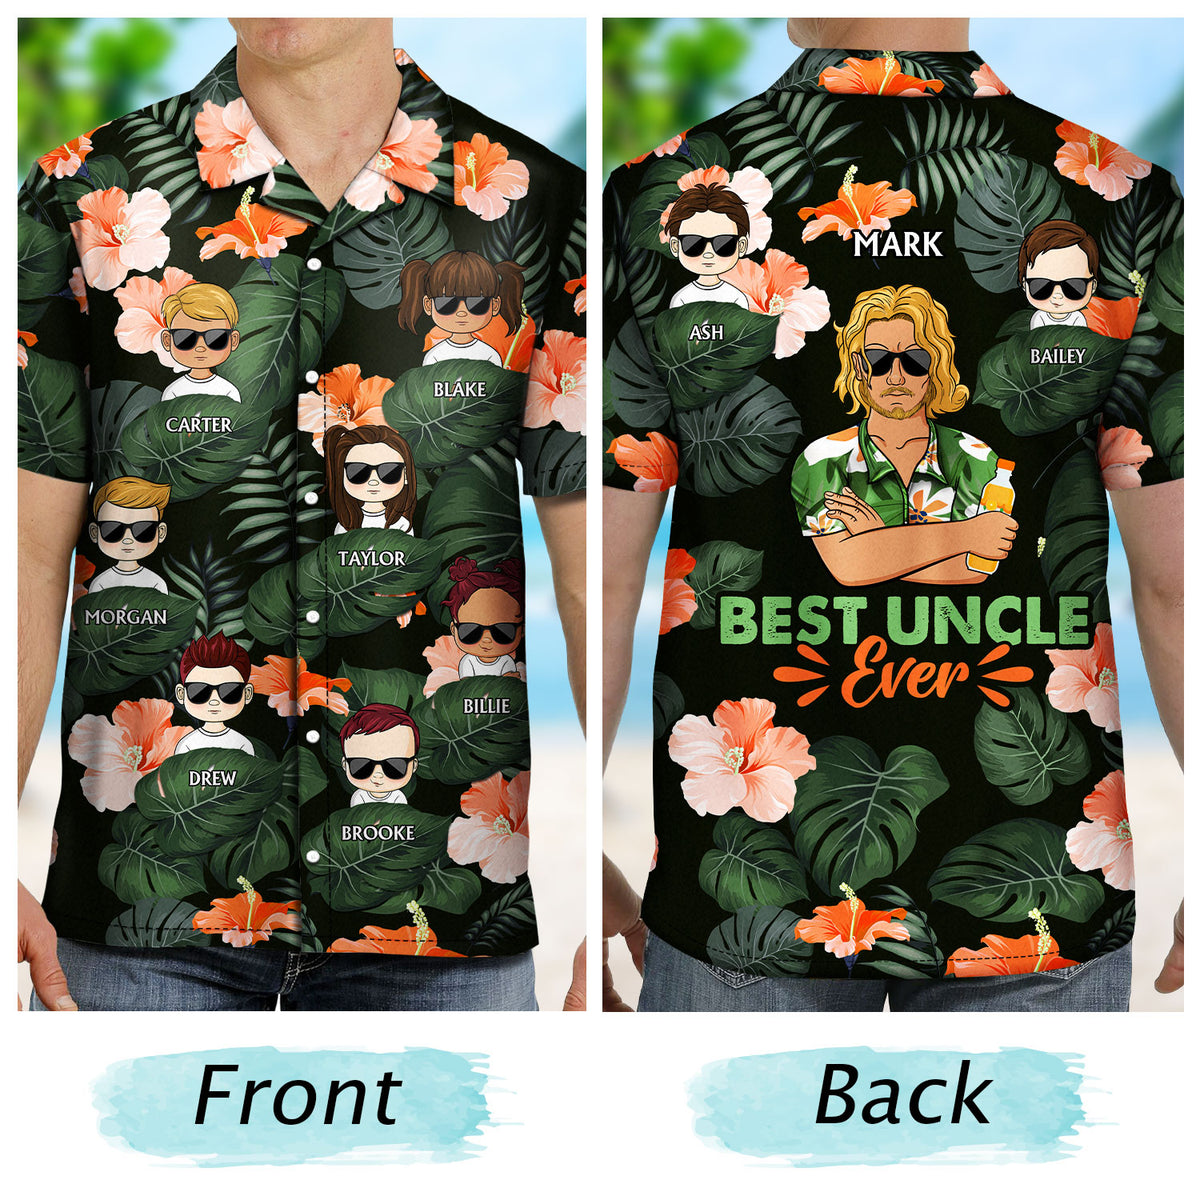 Best Dad, Papa, Uncle Ever - Birthday, Loving Gift for Father, Grandpa, Grandfather - Personalized Custom Hawaiian Shirt unisex / Without Pocket / S